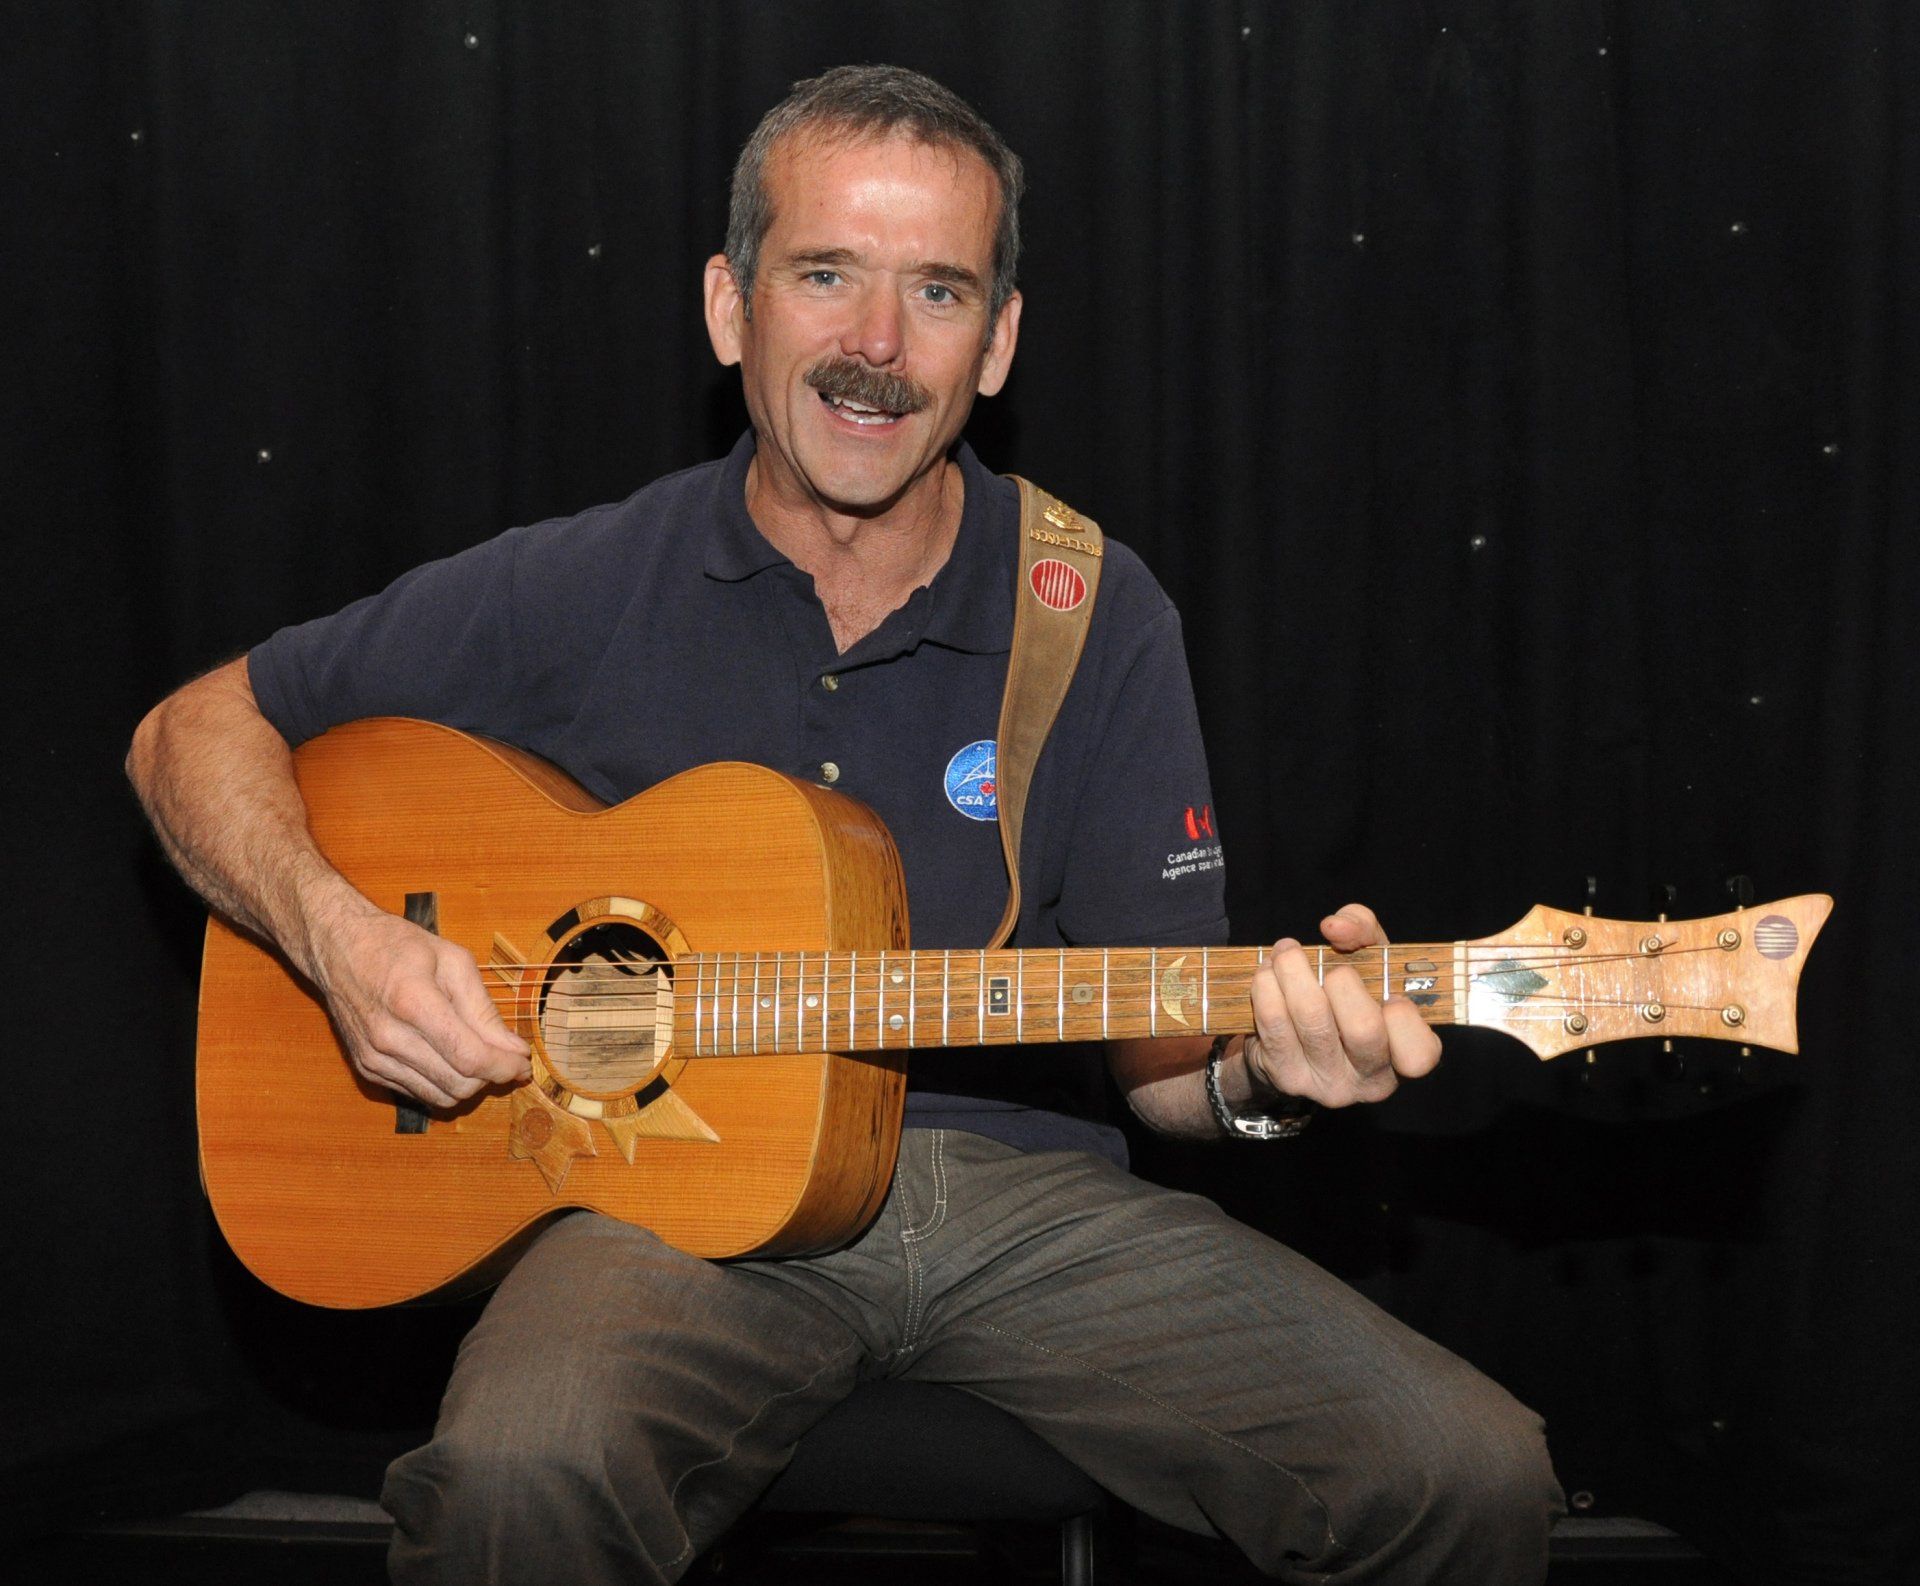 Chris Hadfield with Voyageur. Photo by Paul Mills.